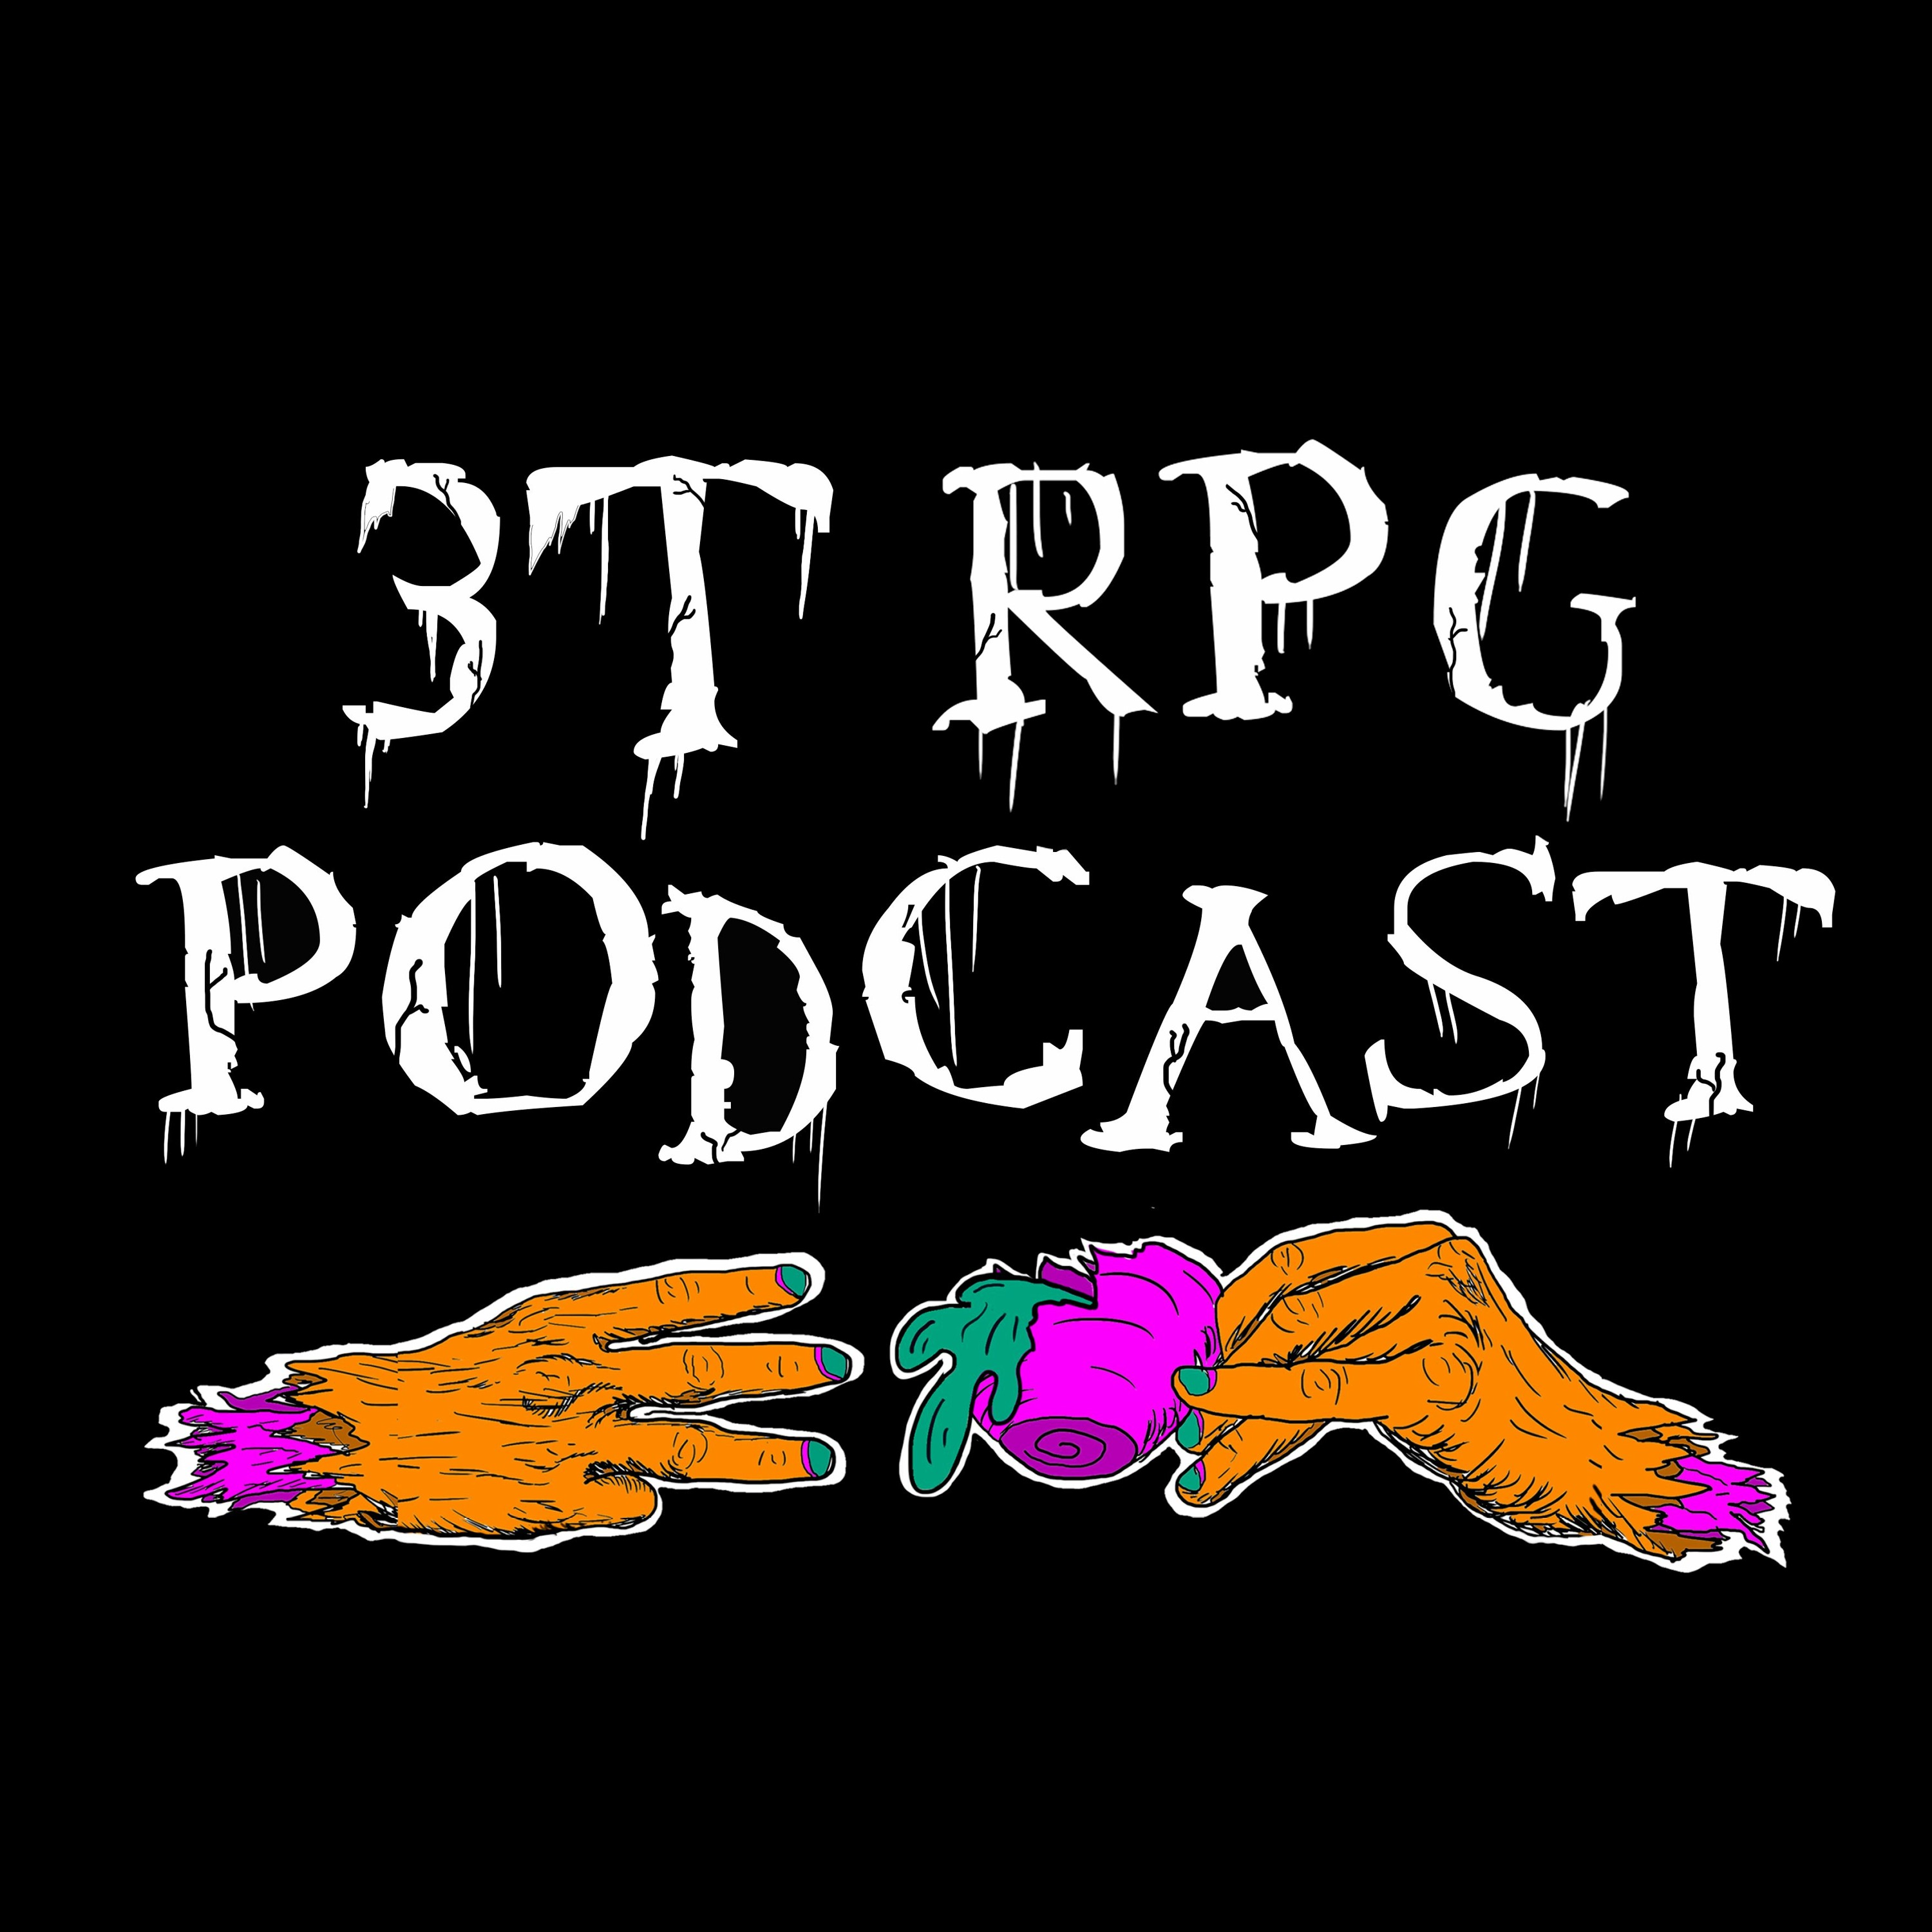 075 - Micro RPGs and why we need them